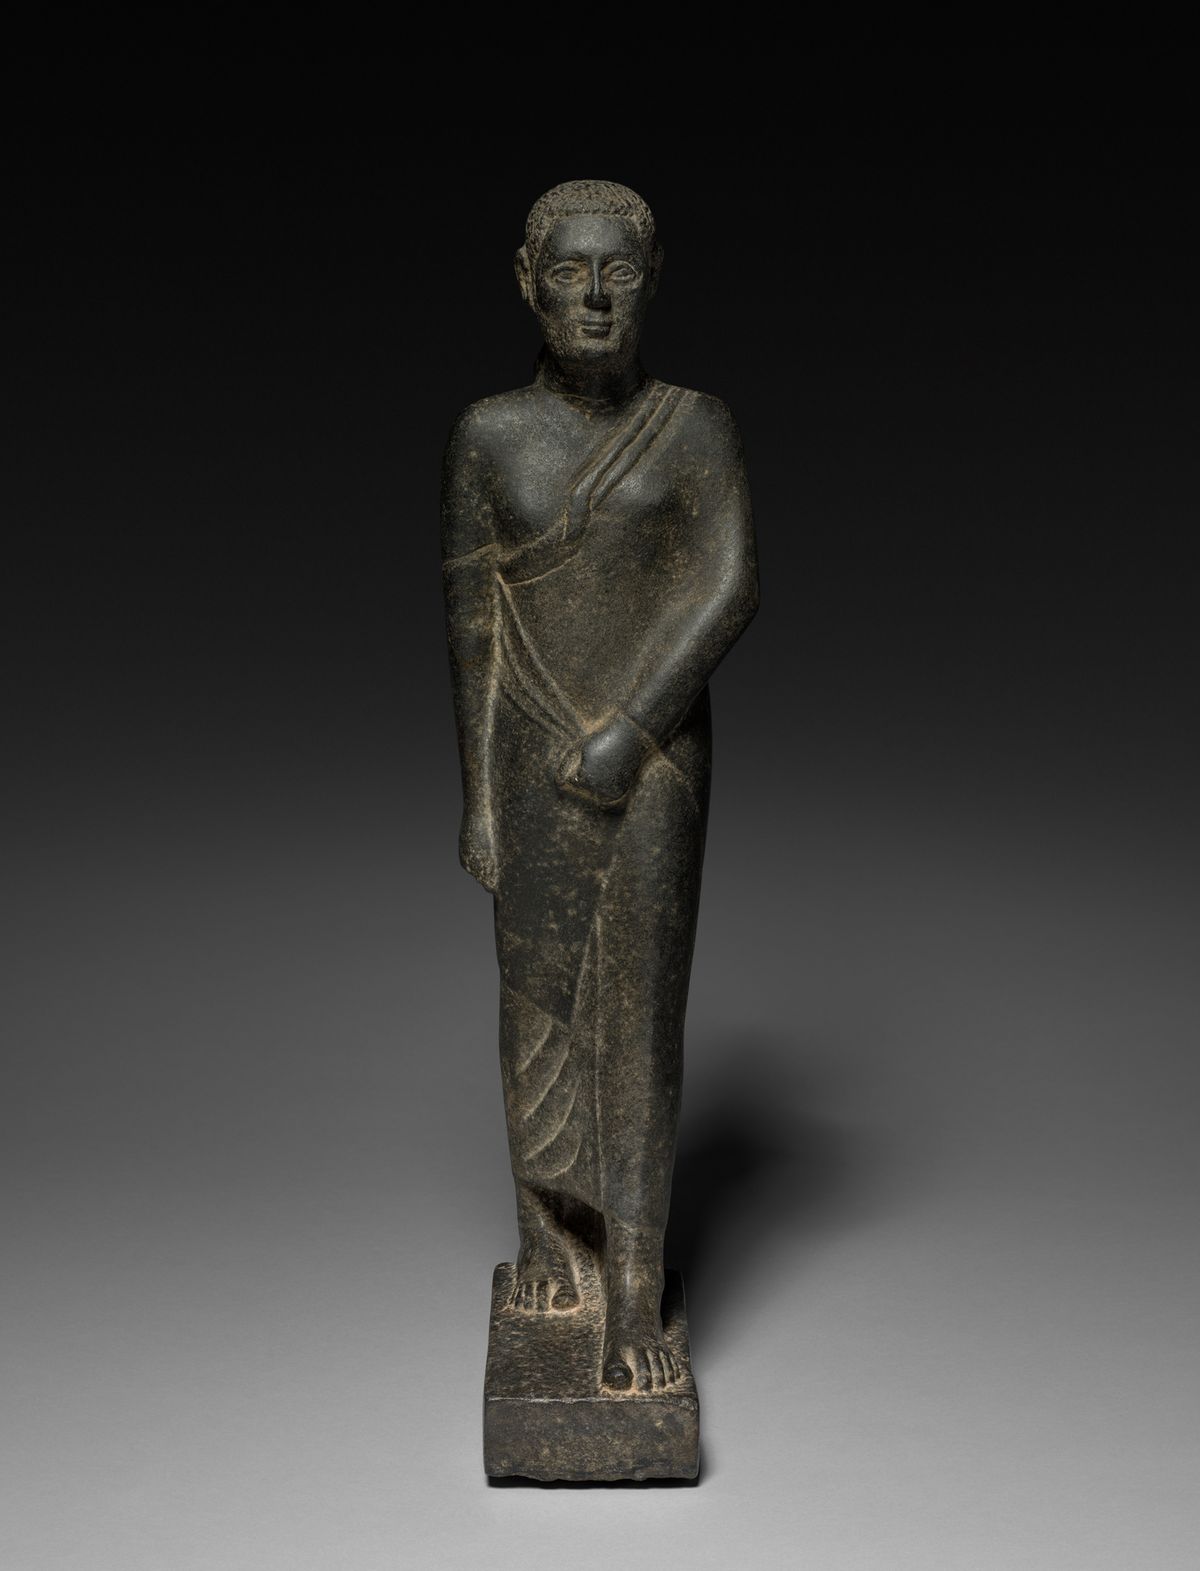 Statue of a Man, 200BCE-100 BCE or later, is considered Egyptian from the Greco-Roman period (332BCE-395CE), and from the Ptolemaic dynasty (305BCE-30 BCE). Cleveland Museum of Art